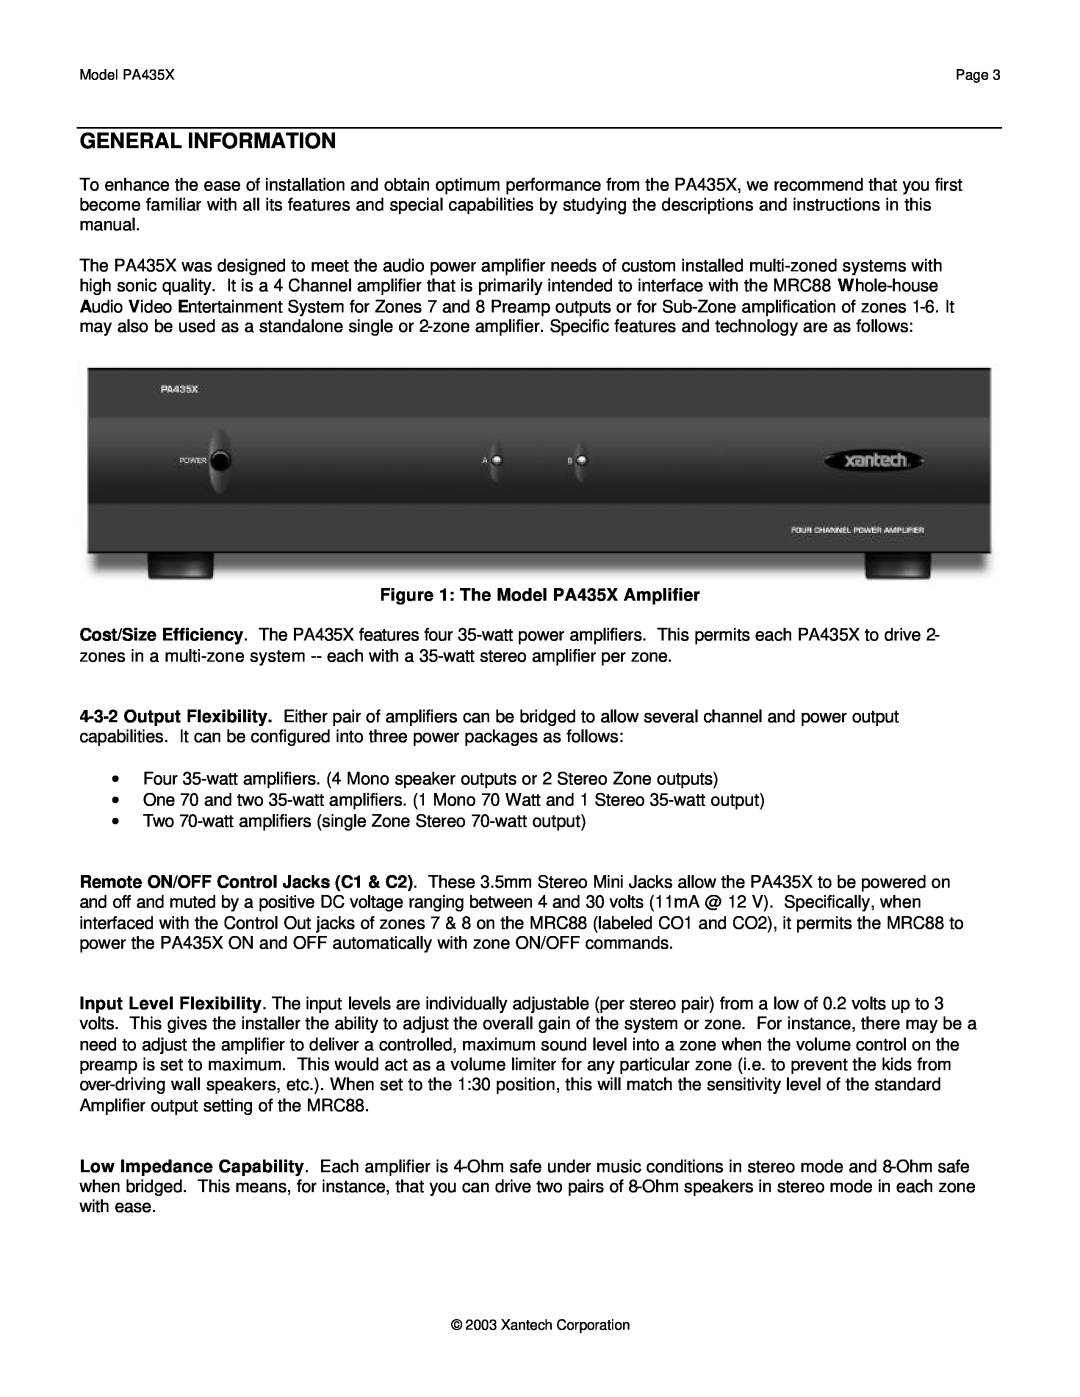 Xantech installation instructions General Information, The Model PA435X Amplifier 